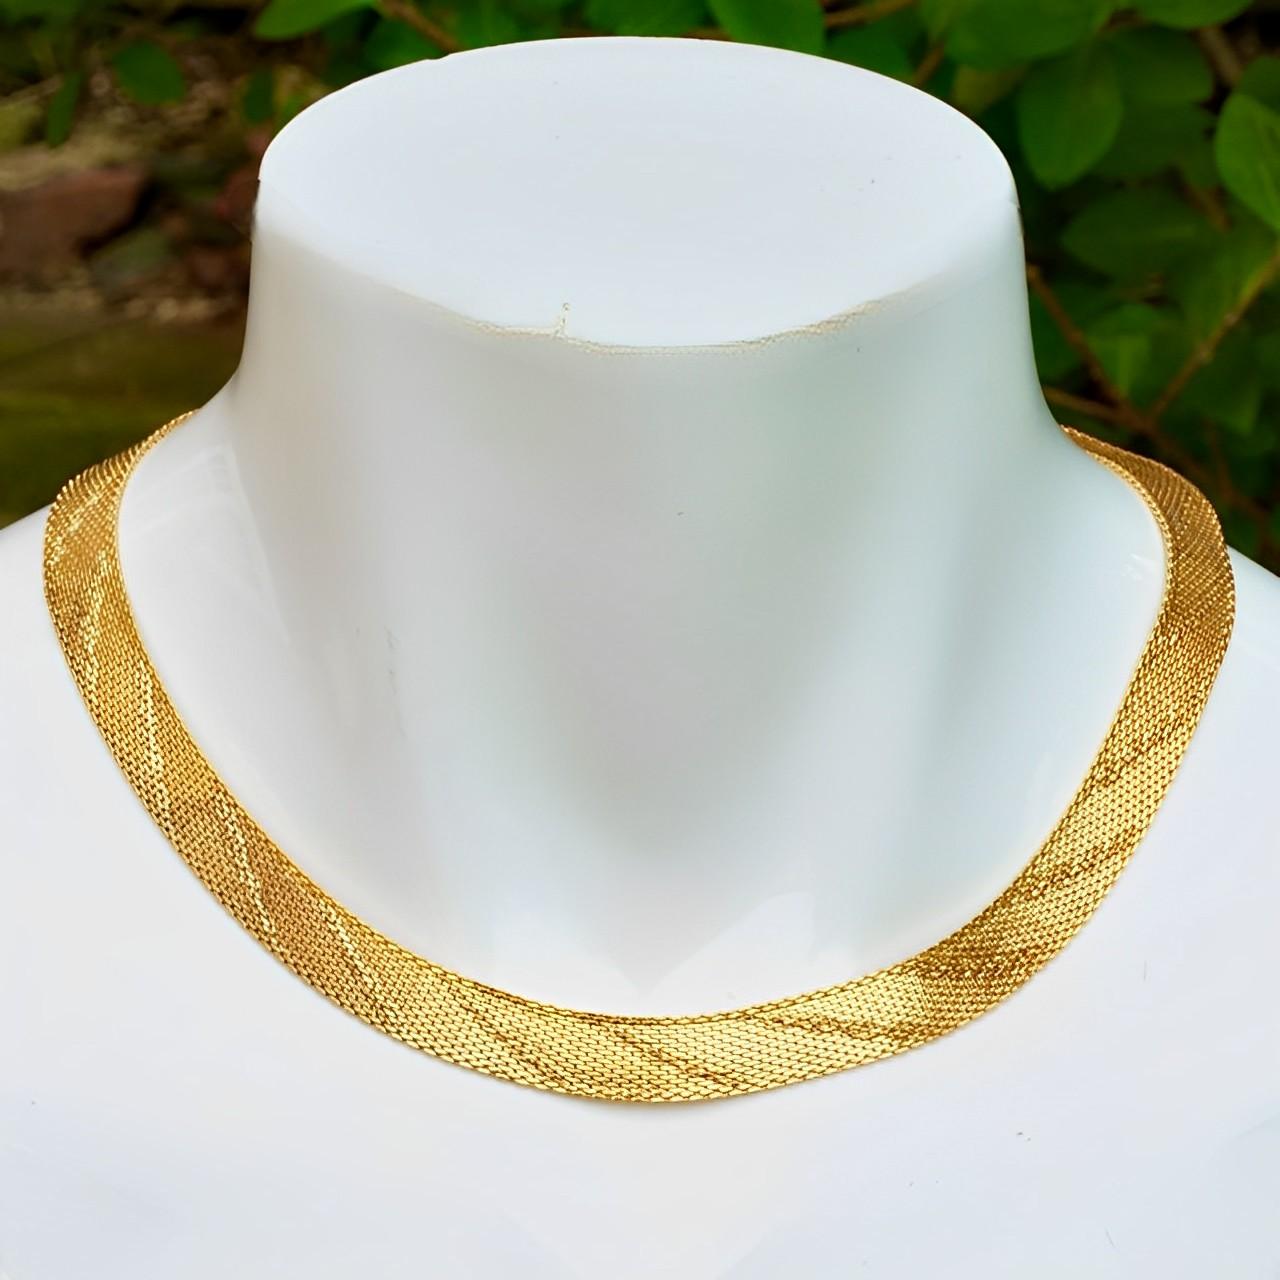 Beautiful gold plated textured mesh necklace, with a contrasting shiny line design. Measuring length approximately 40 cm / 15.7 inches plus an extension chain of 4.5 cm / 1.7 inches, by width 1 cm / .4 inch. The necklace and clasp has some wear to